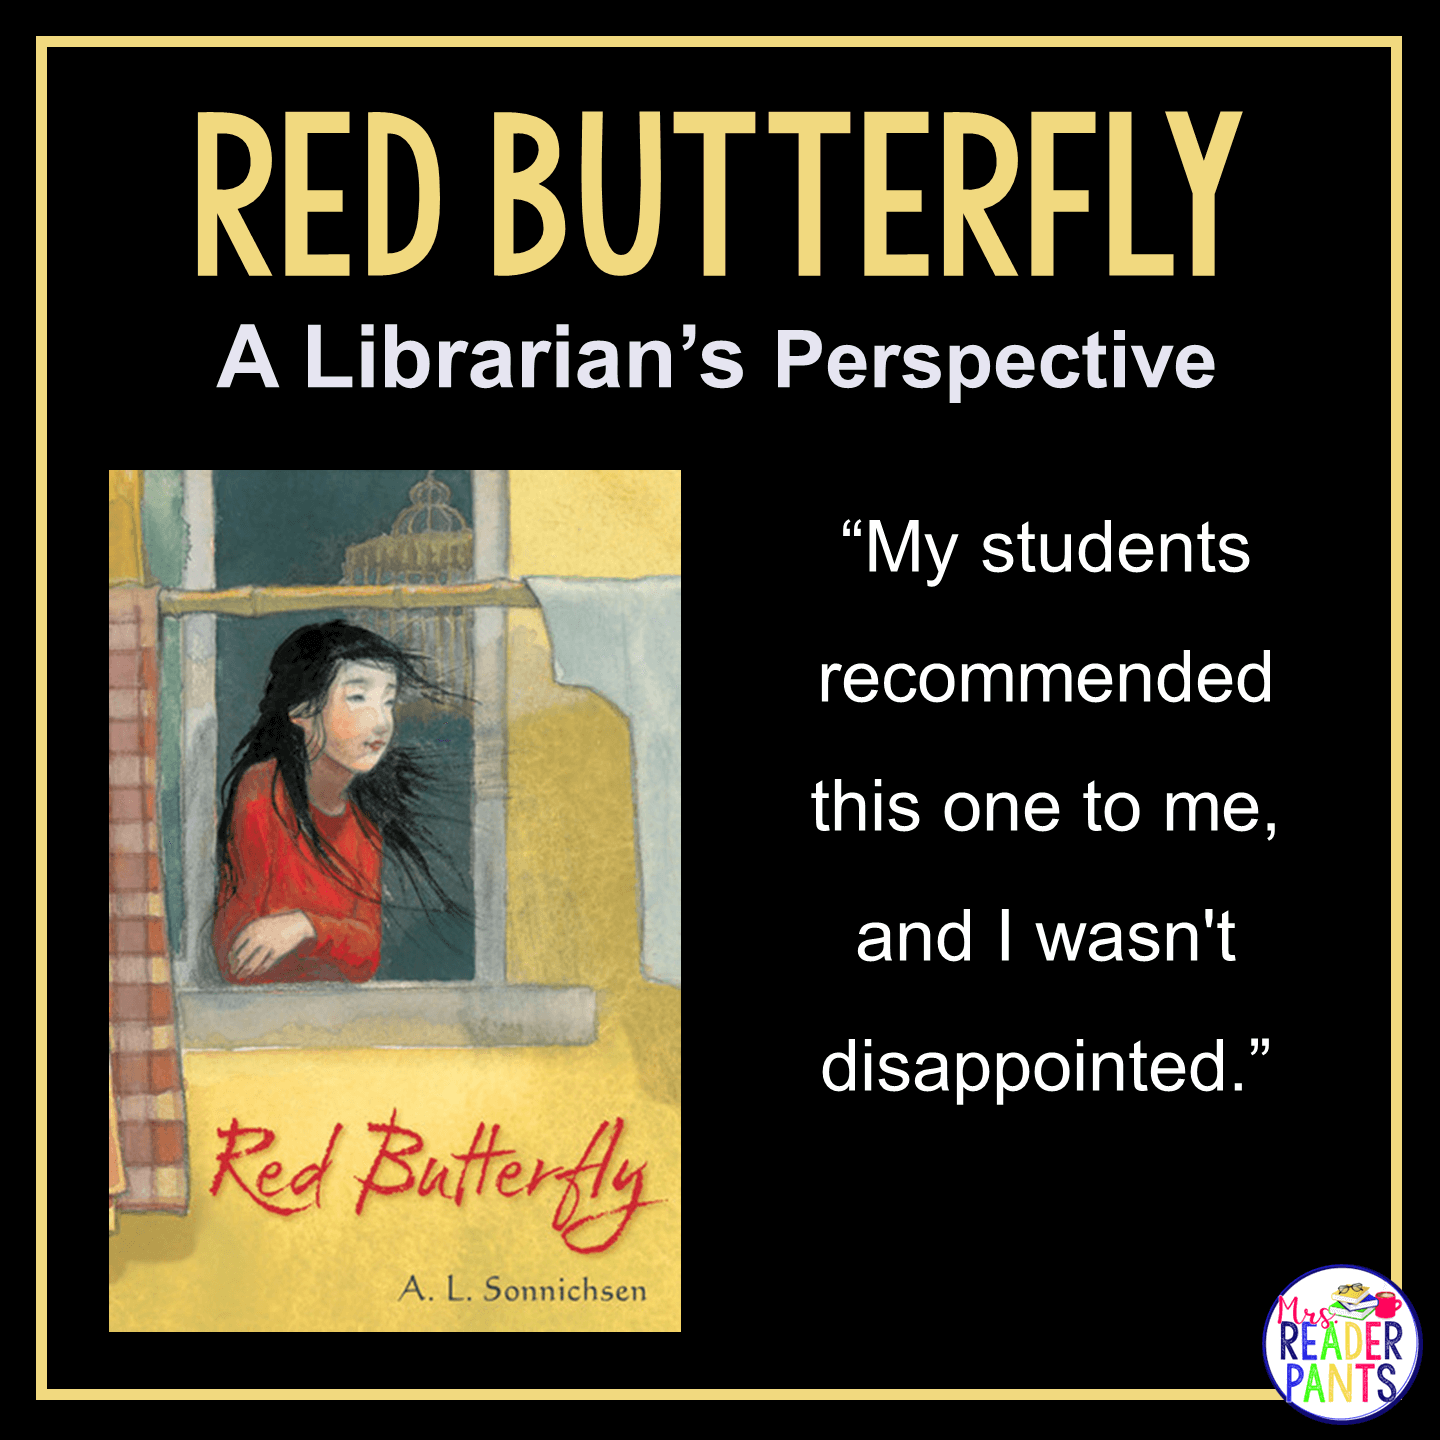 This is a Librarian's Perspective Review of Red Butterfly by AL Sonnichsen.